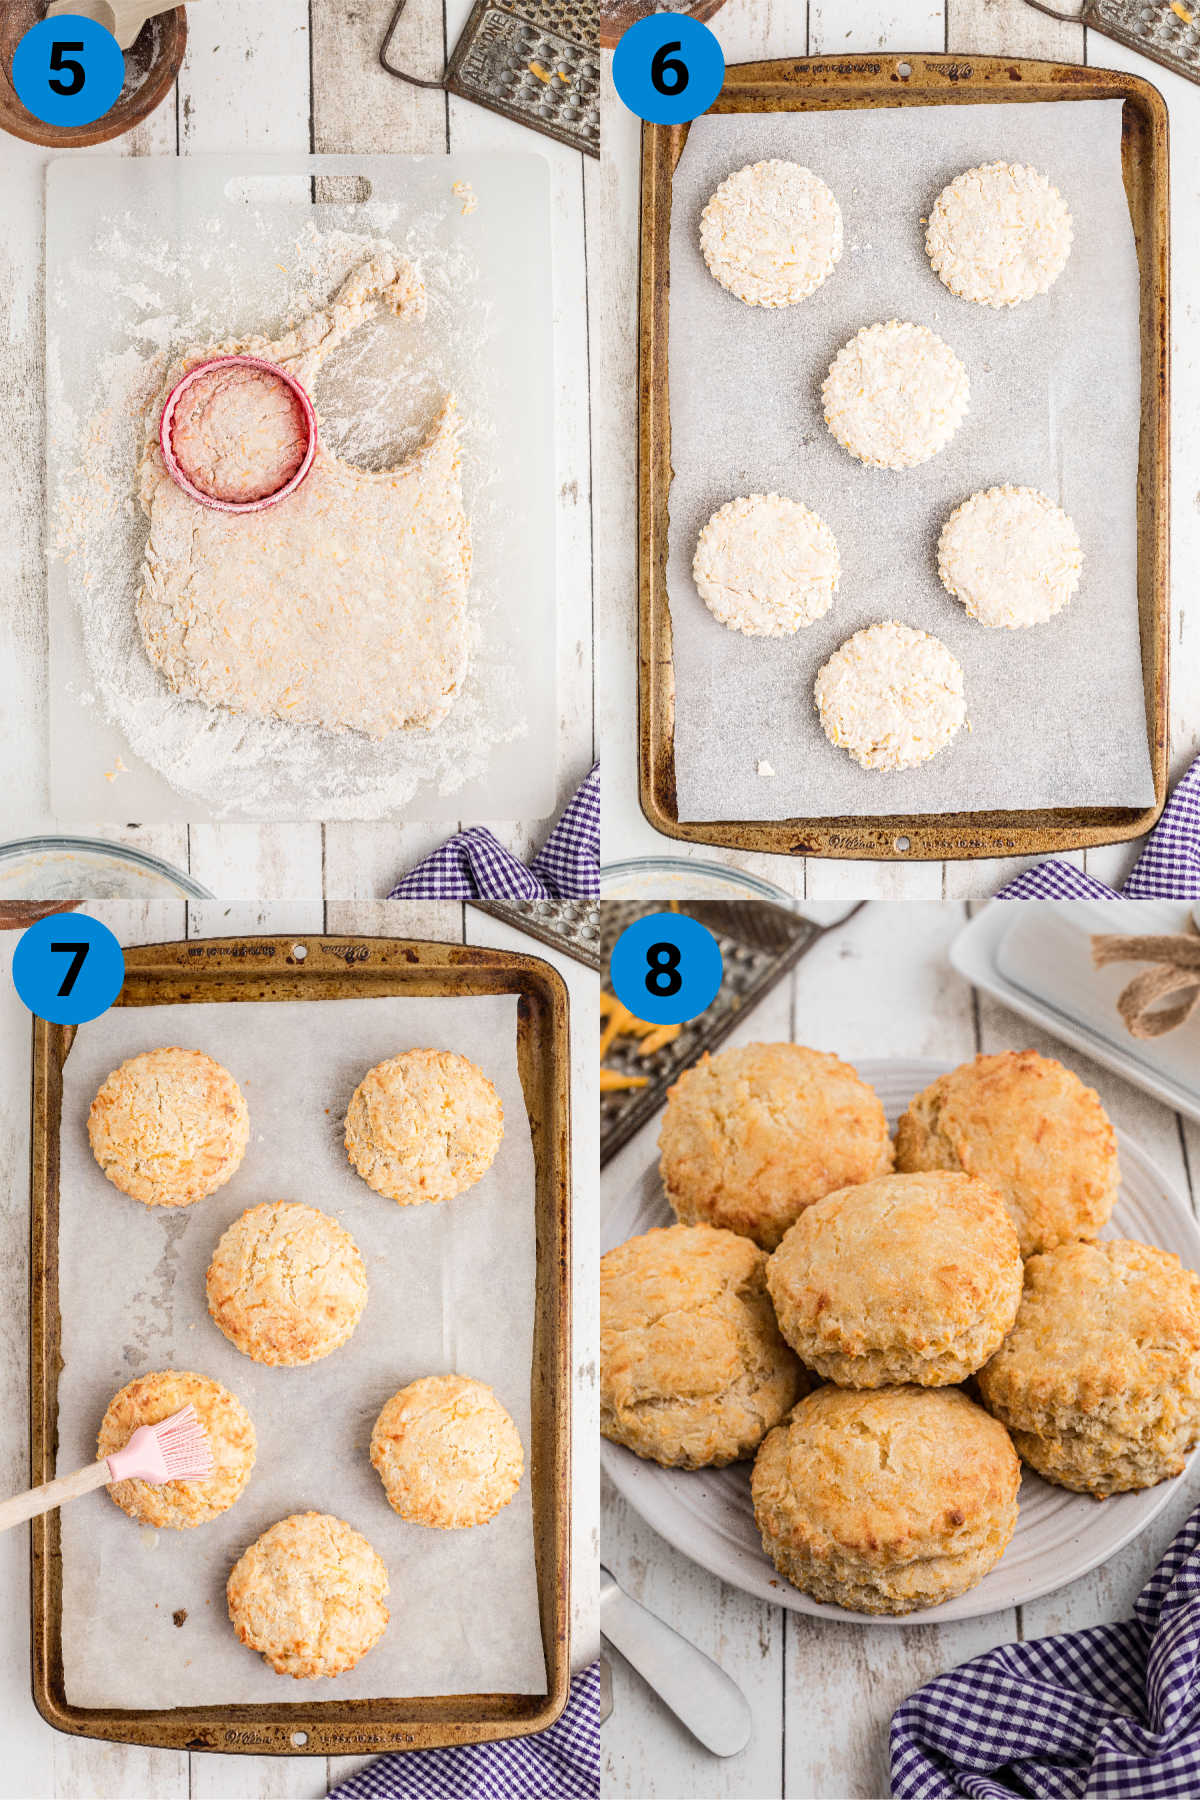 A collage of four images showing how to make cheese biscuits, recipe steps 5 through 8.